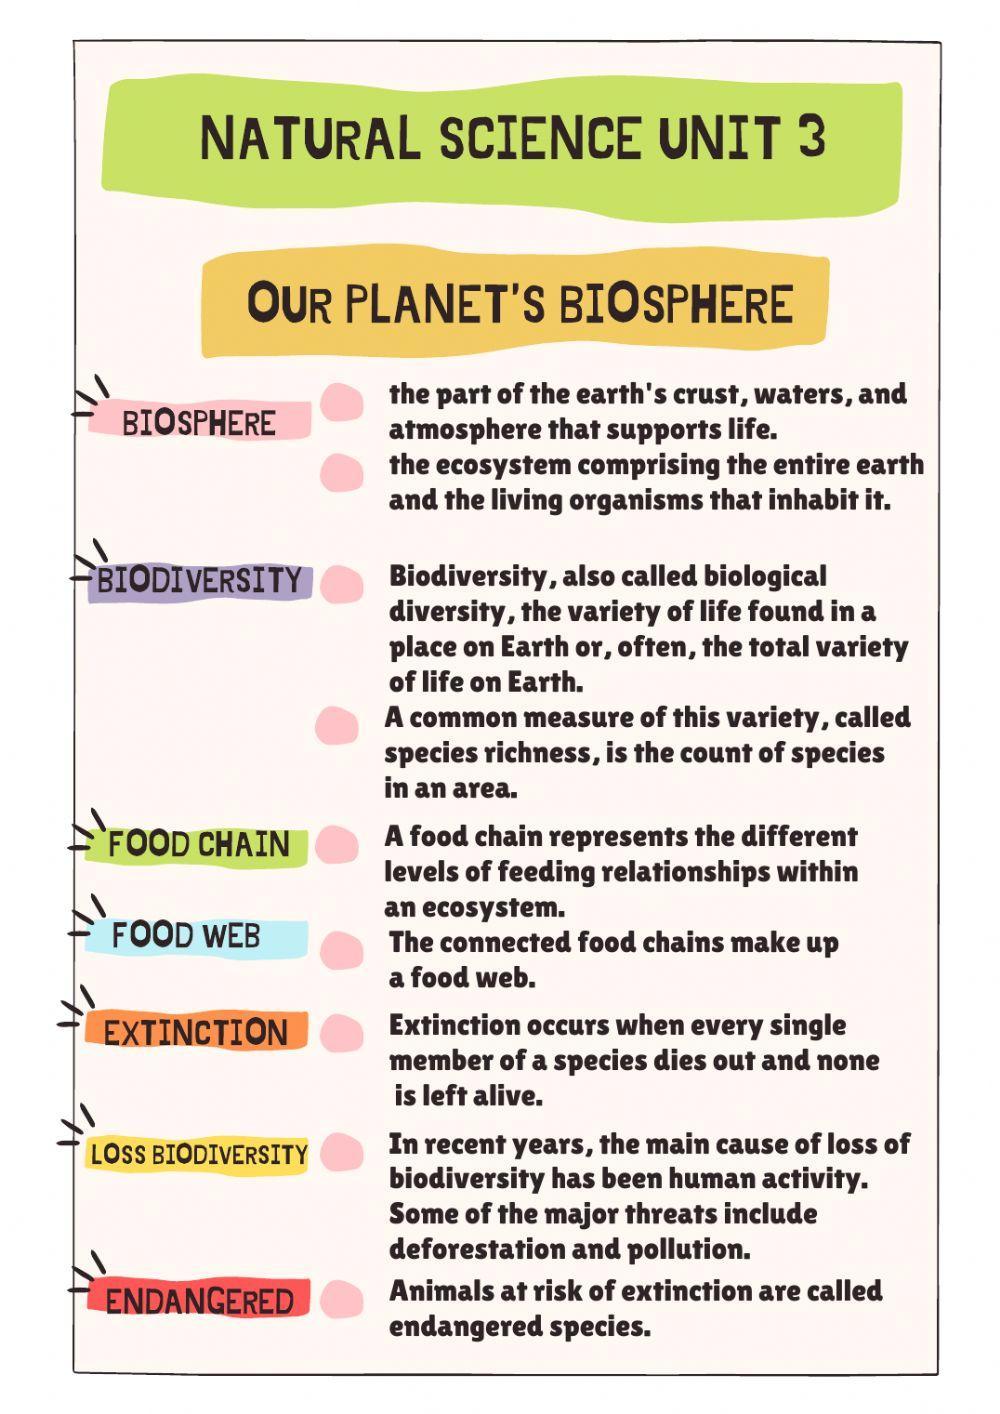 Our planet's biosphere